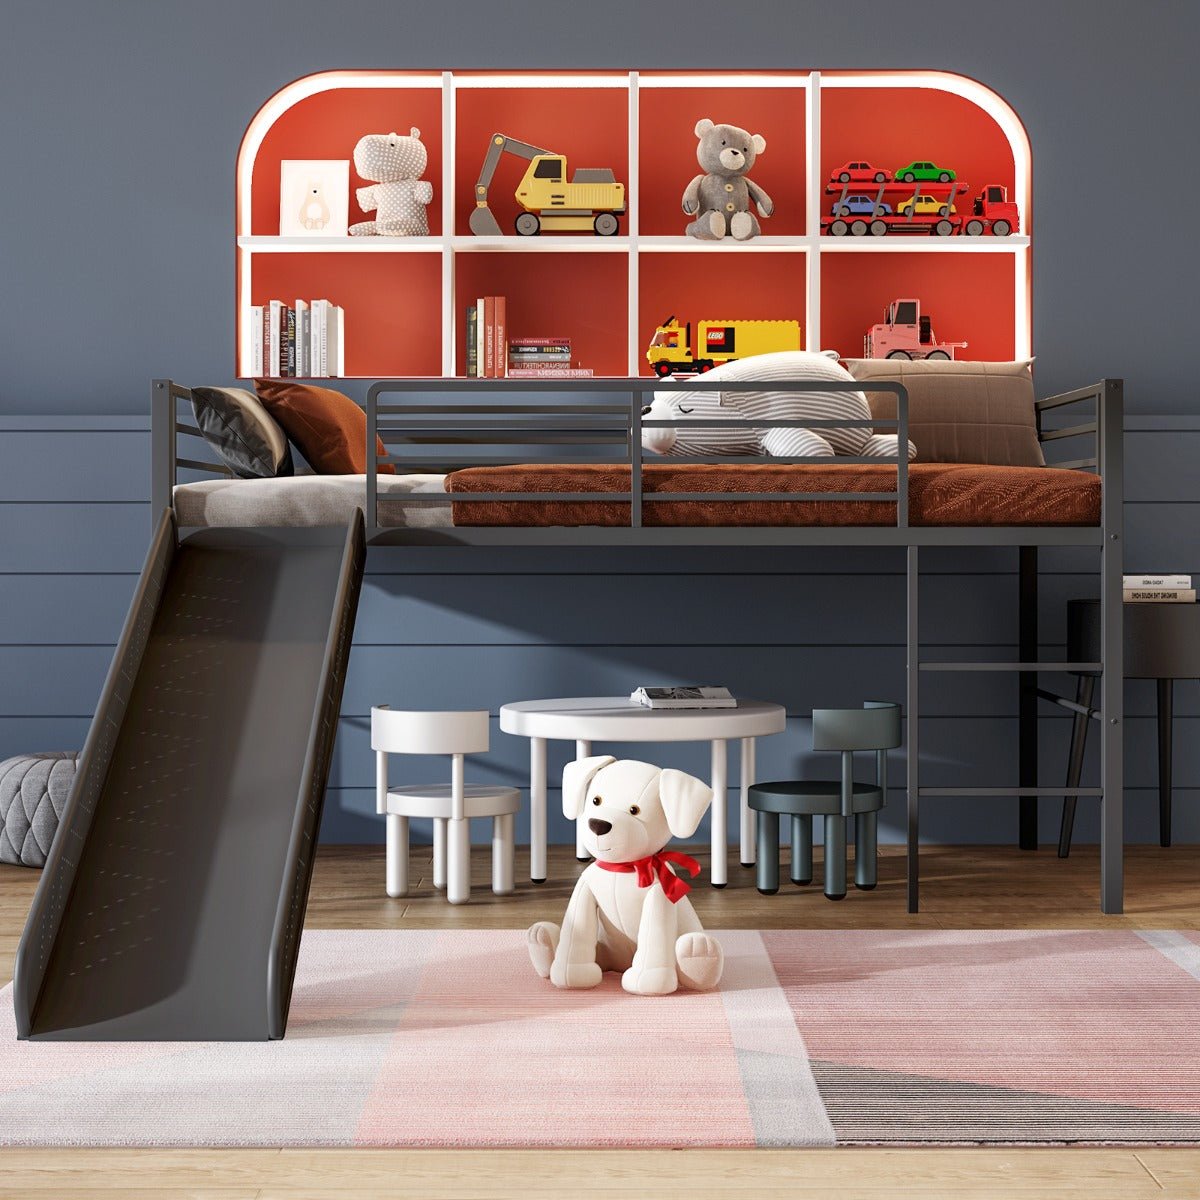 Imaginative and Fun Sleepovers with Loft Bed